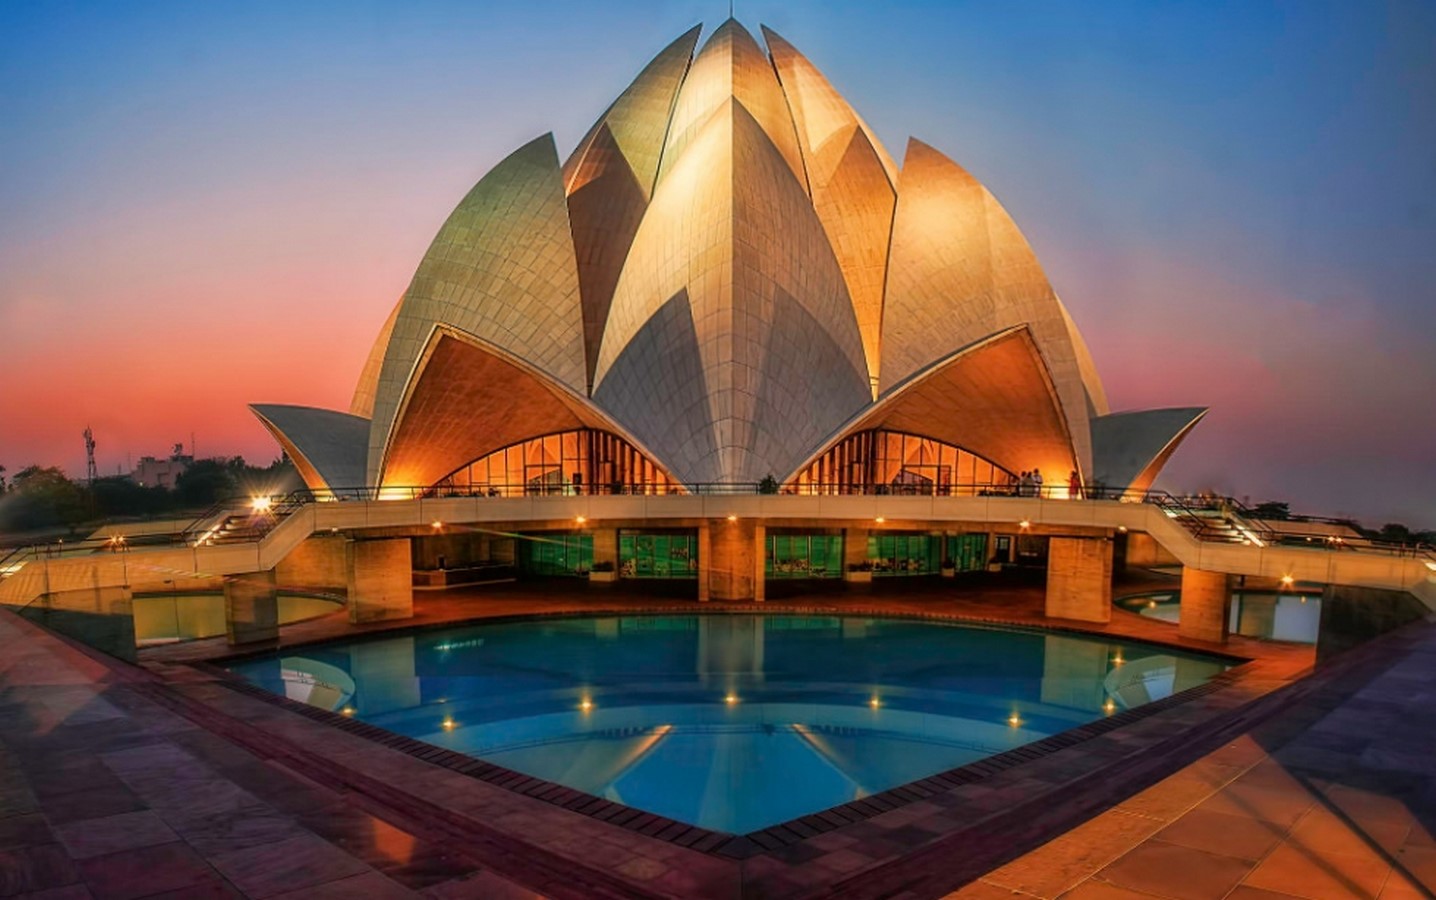 10 Things you did not know about The Lotus Temple - New Delhi - Sheet1